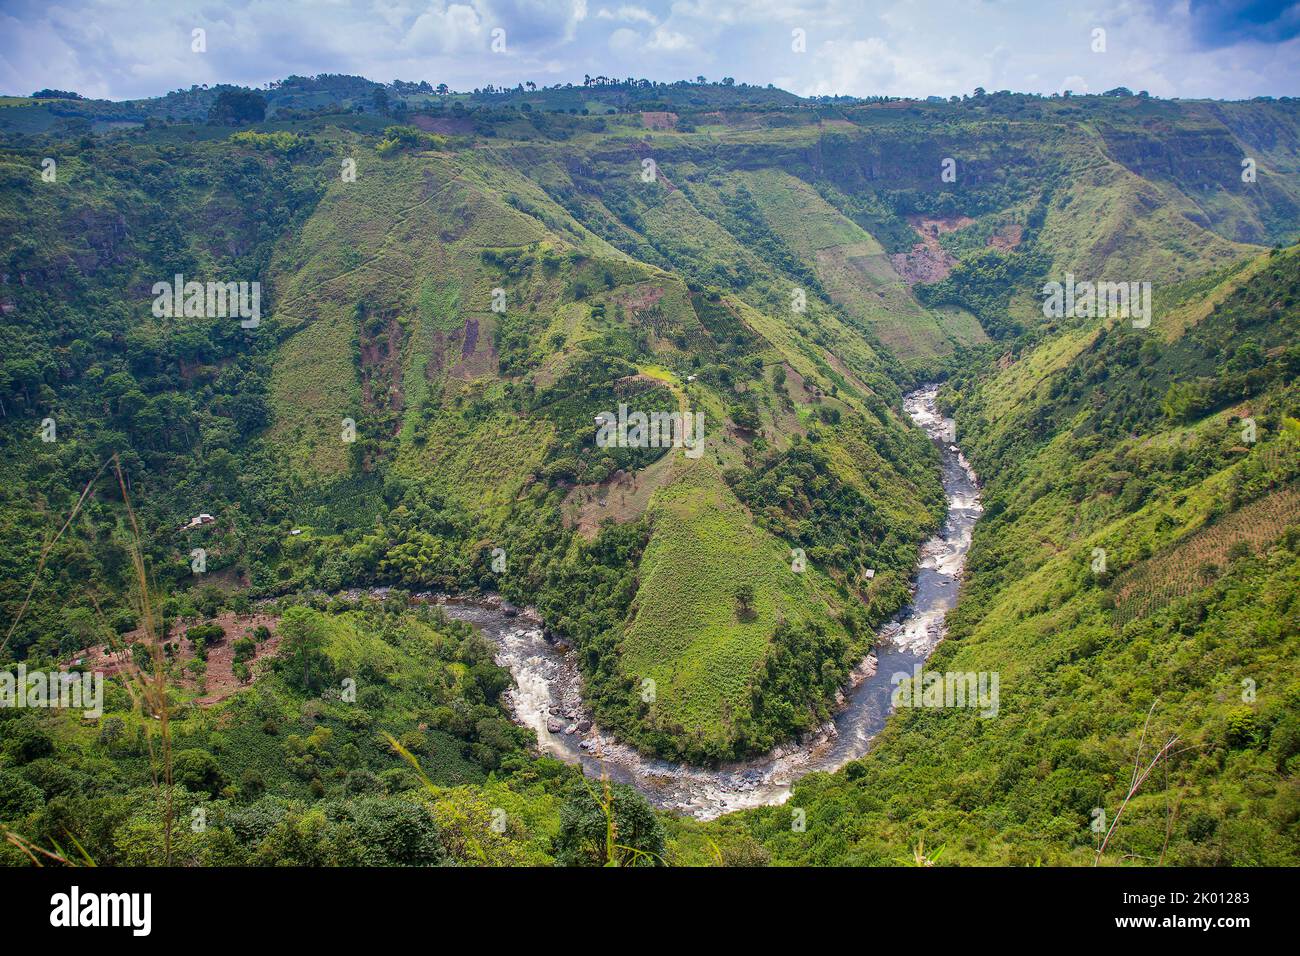 Colombia, Huila department, San Agustin region the Rio Magdalena river as seen streaming through the Andes mountains in this area. Stock Photo